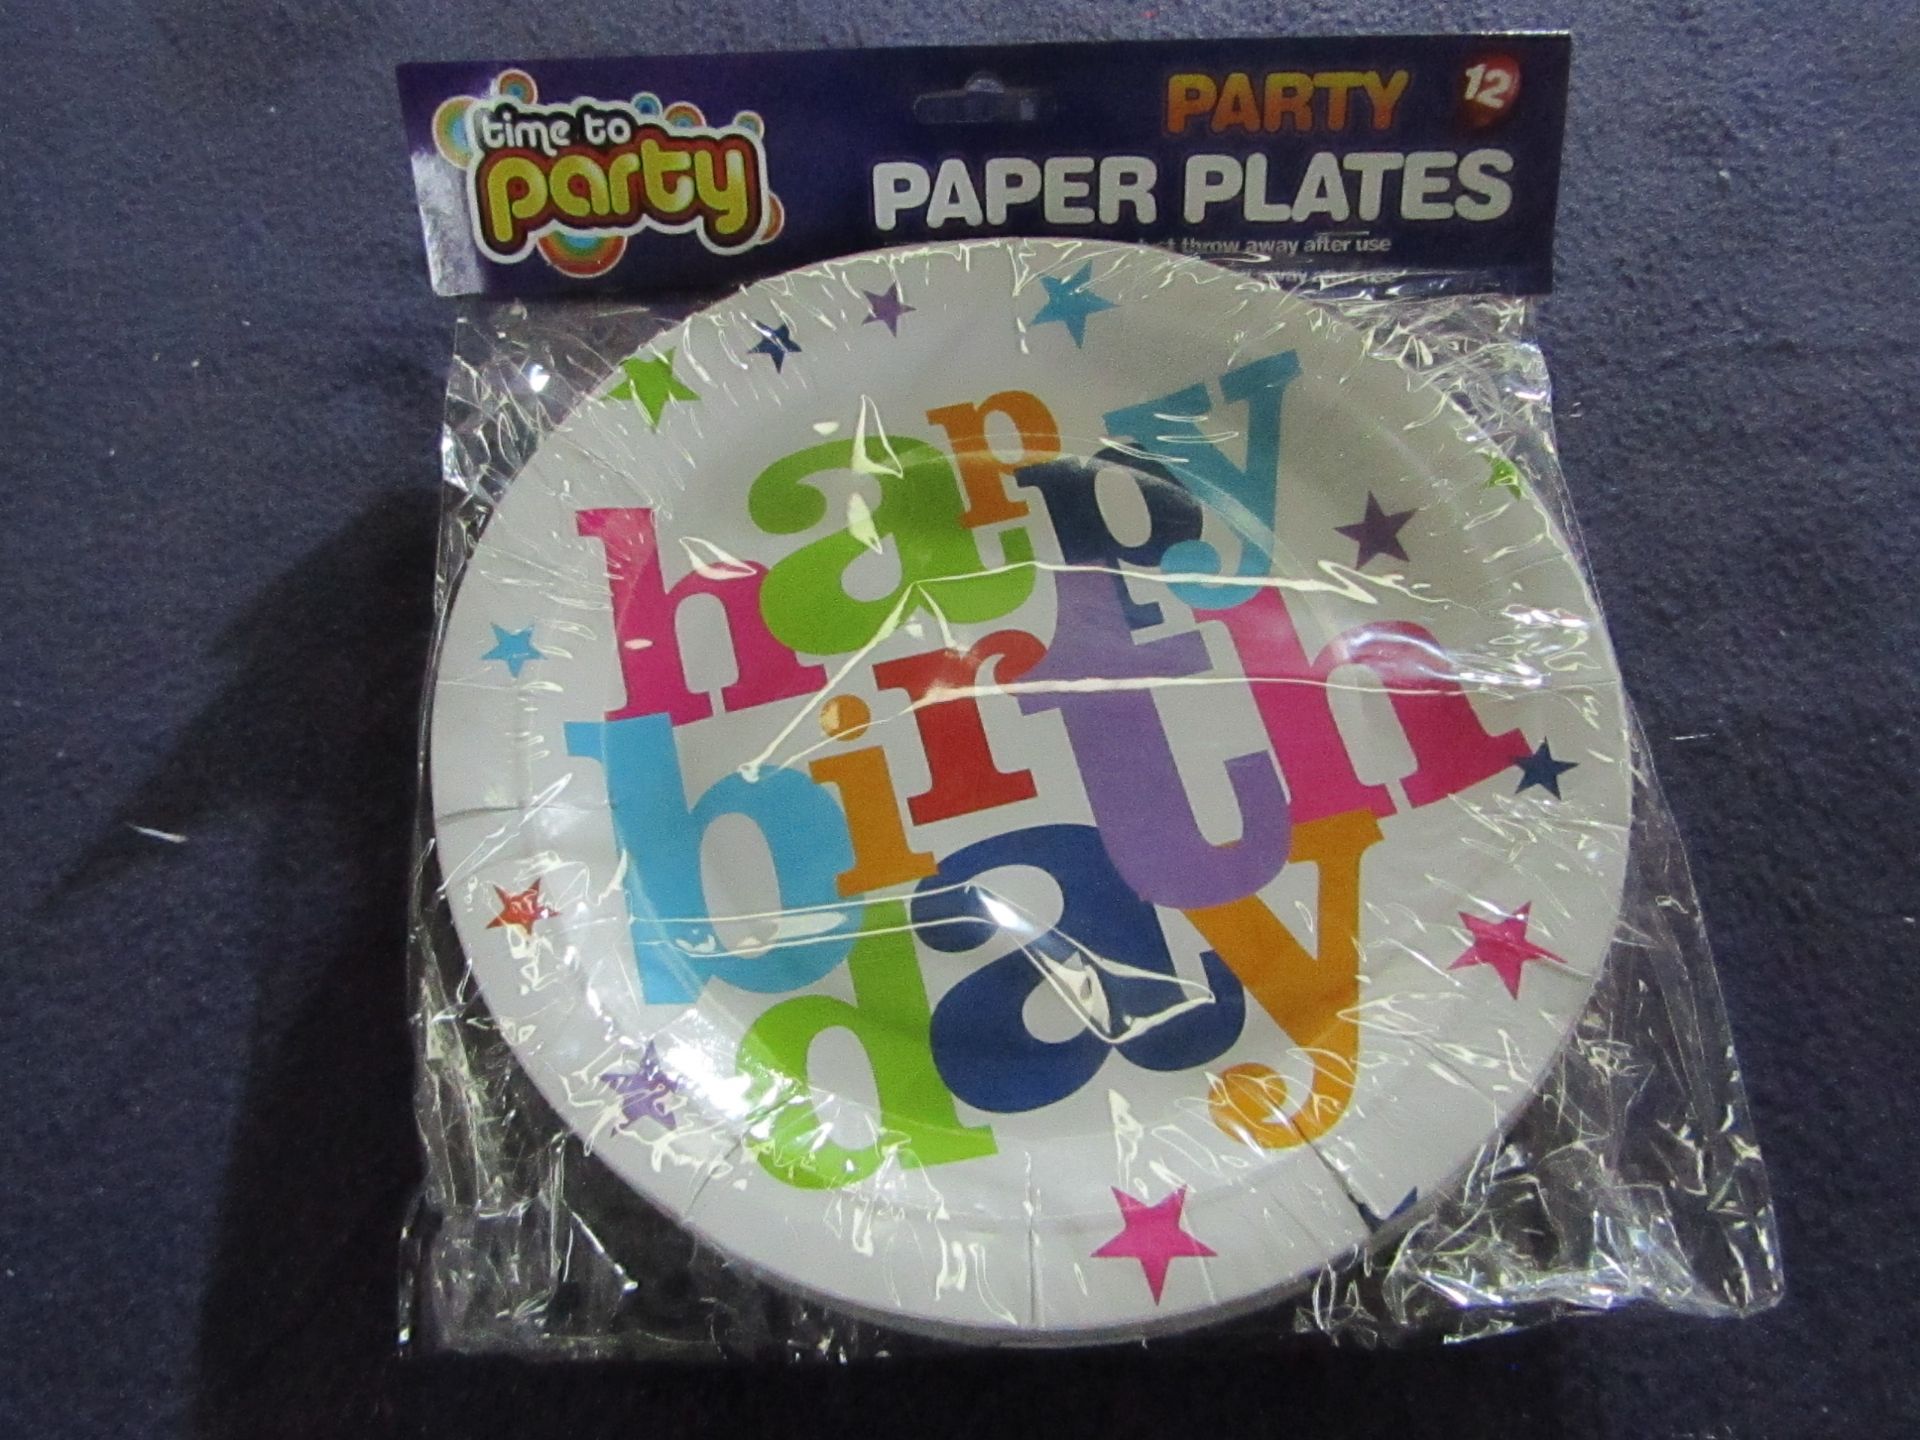 24x Time To Party - Set of 12 Happy Birthday Paper Plates - All Unused & Packaged.